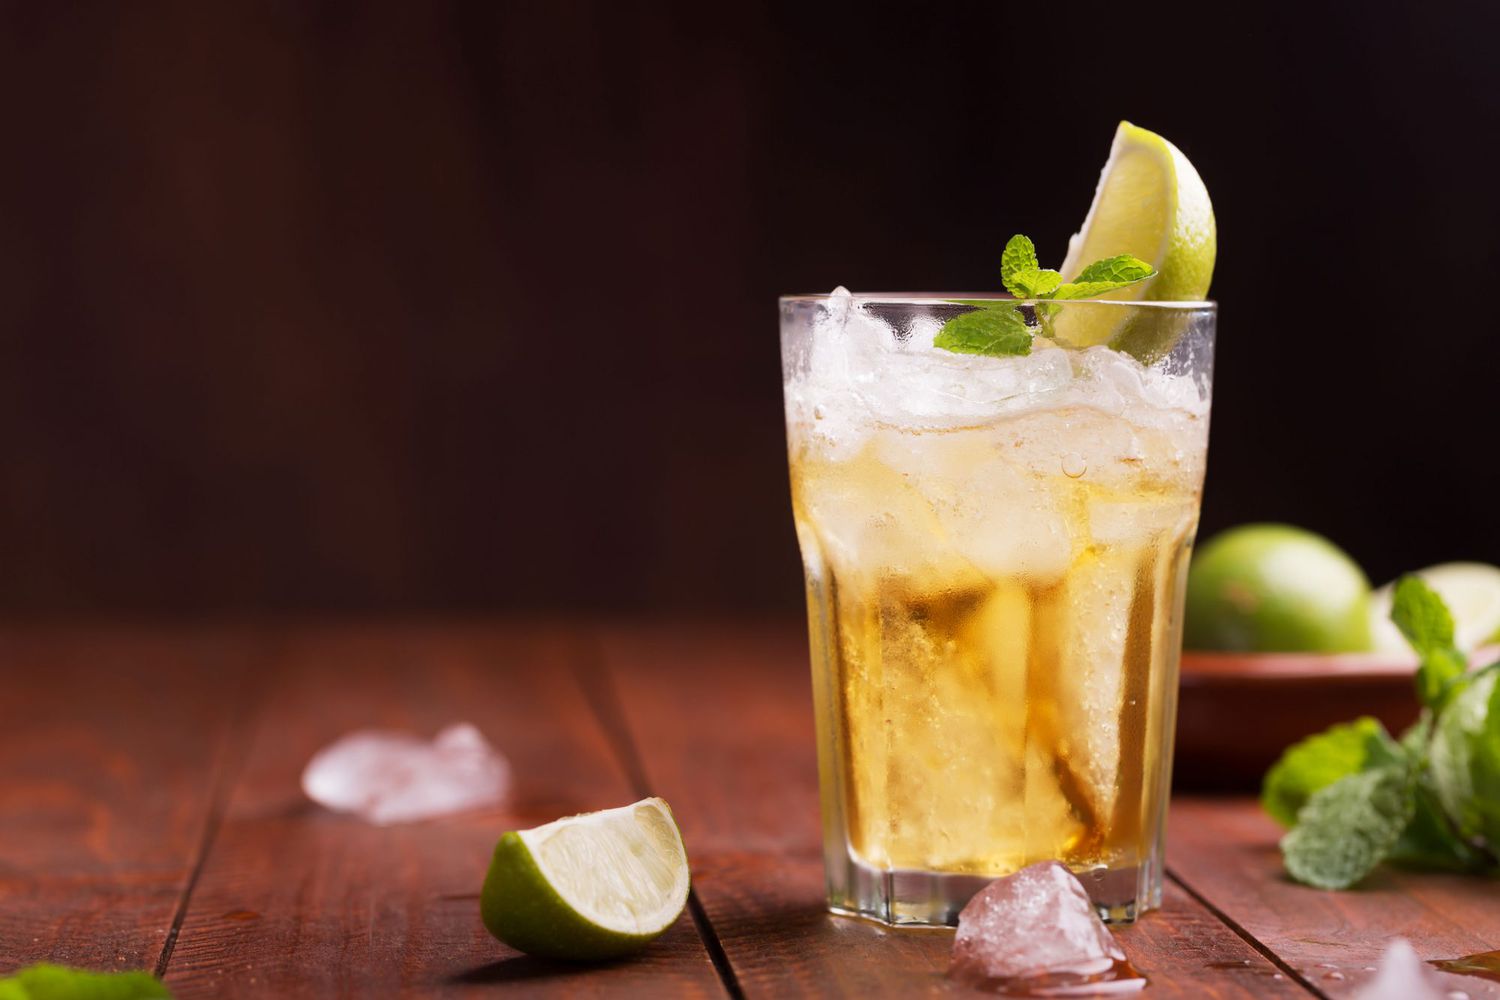 Glass of ginger beer with lime wedge garnish on wooden table